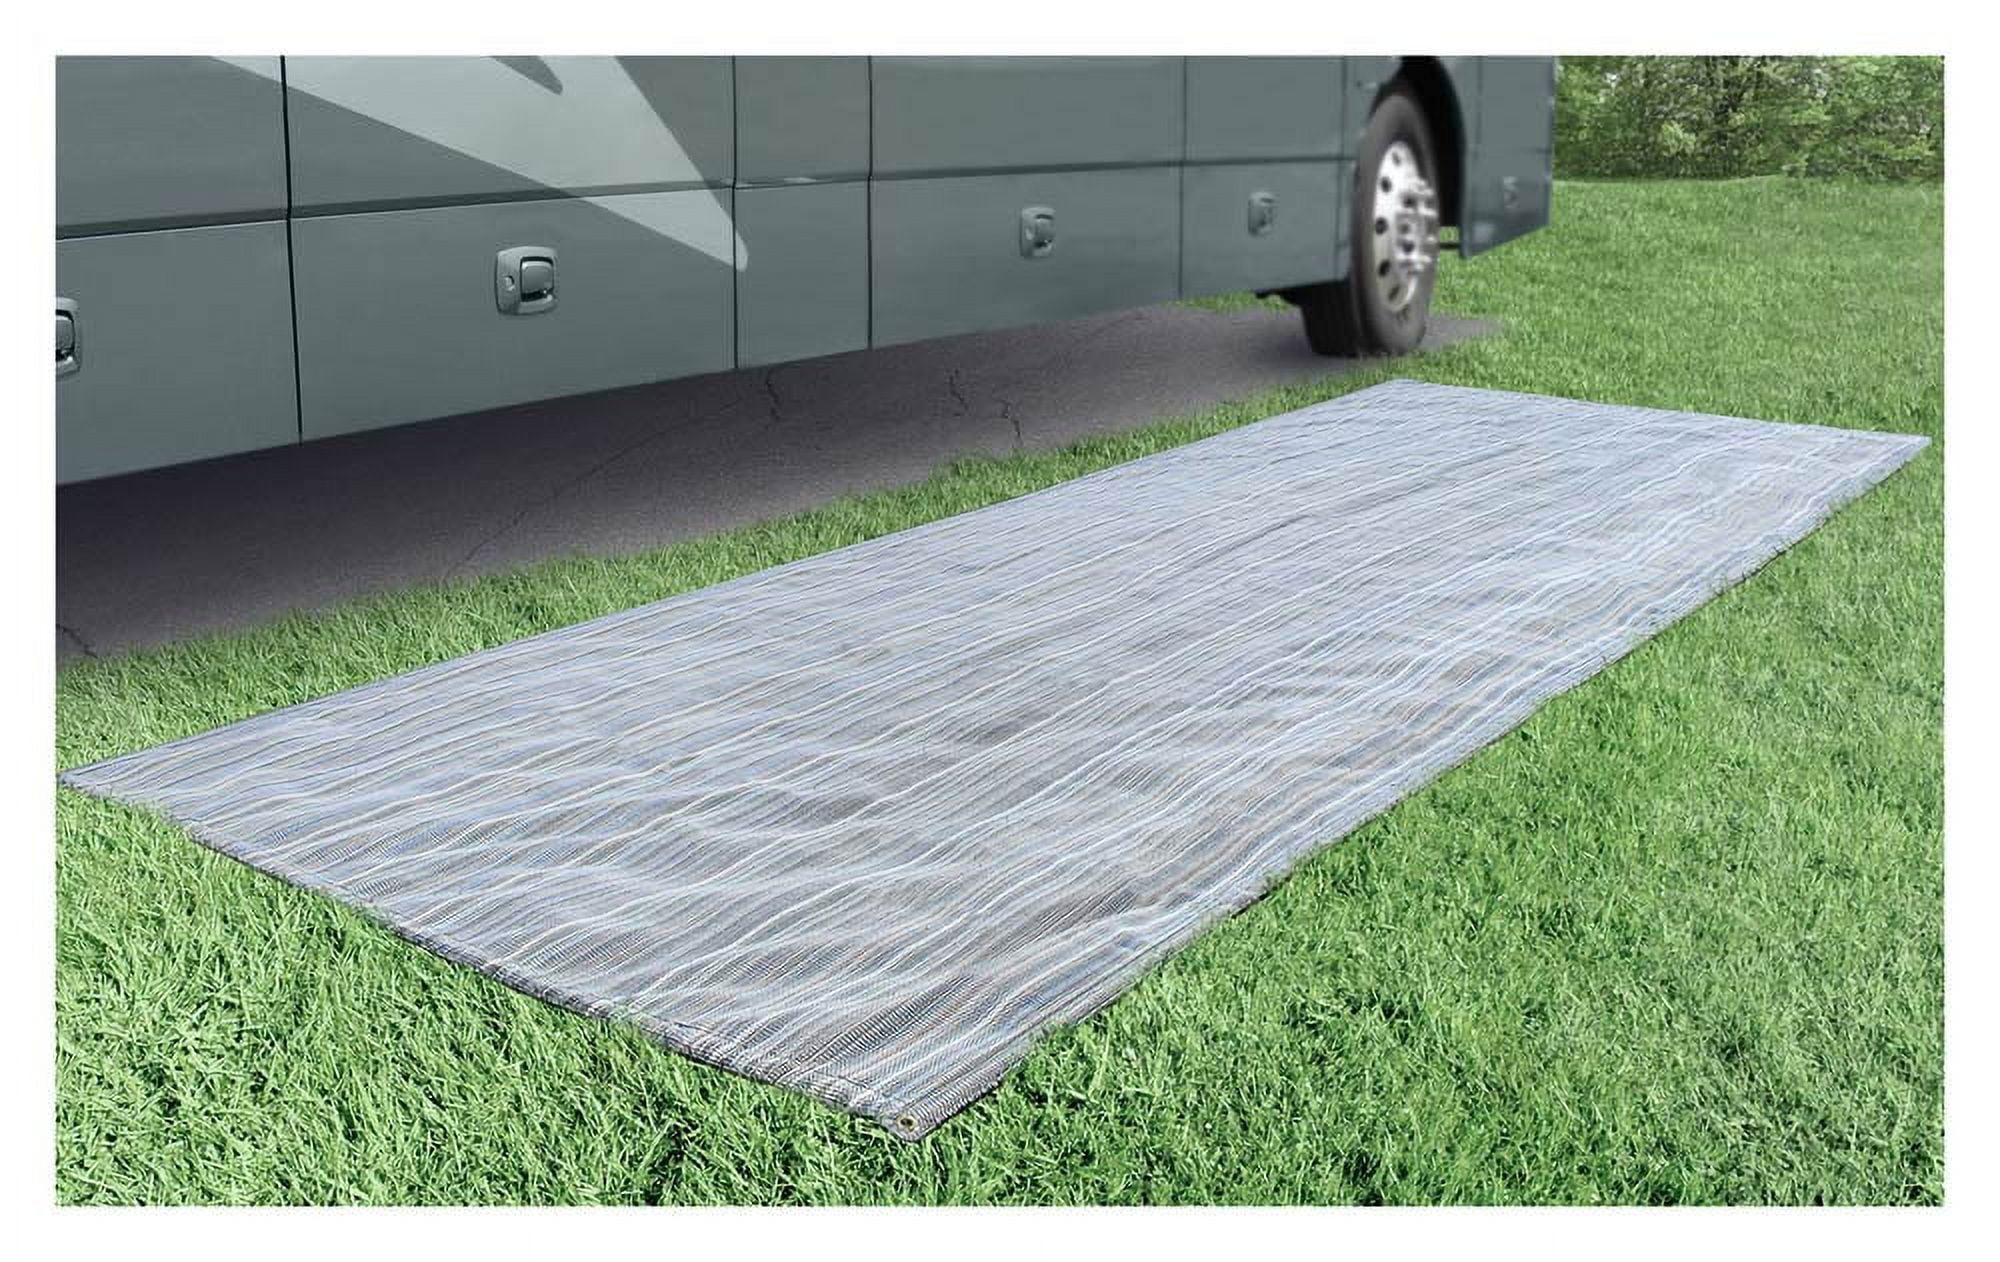 Aero-Weave Breathable Outdoor Mat 7.5 Ft. X 20 Ft. - Prest-O-Fit